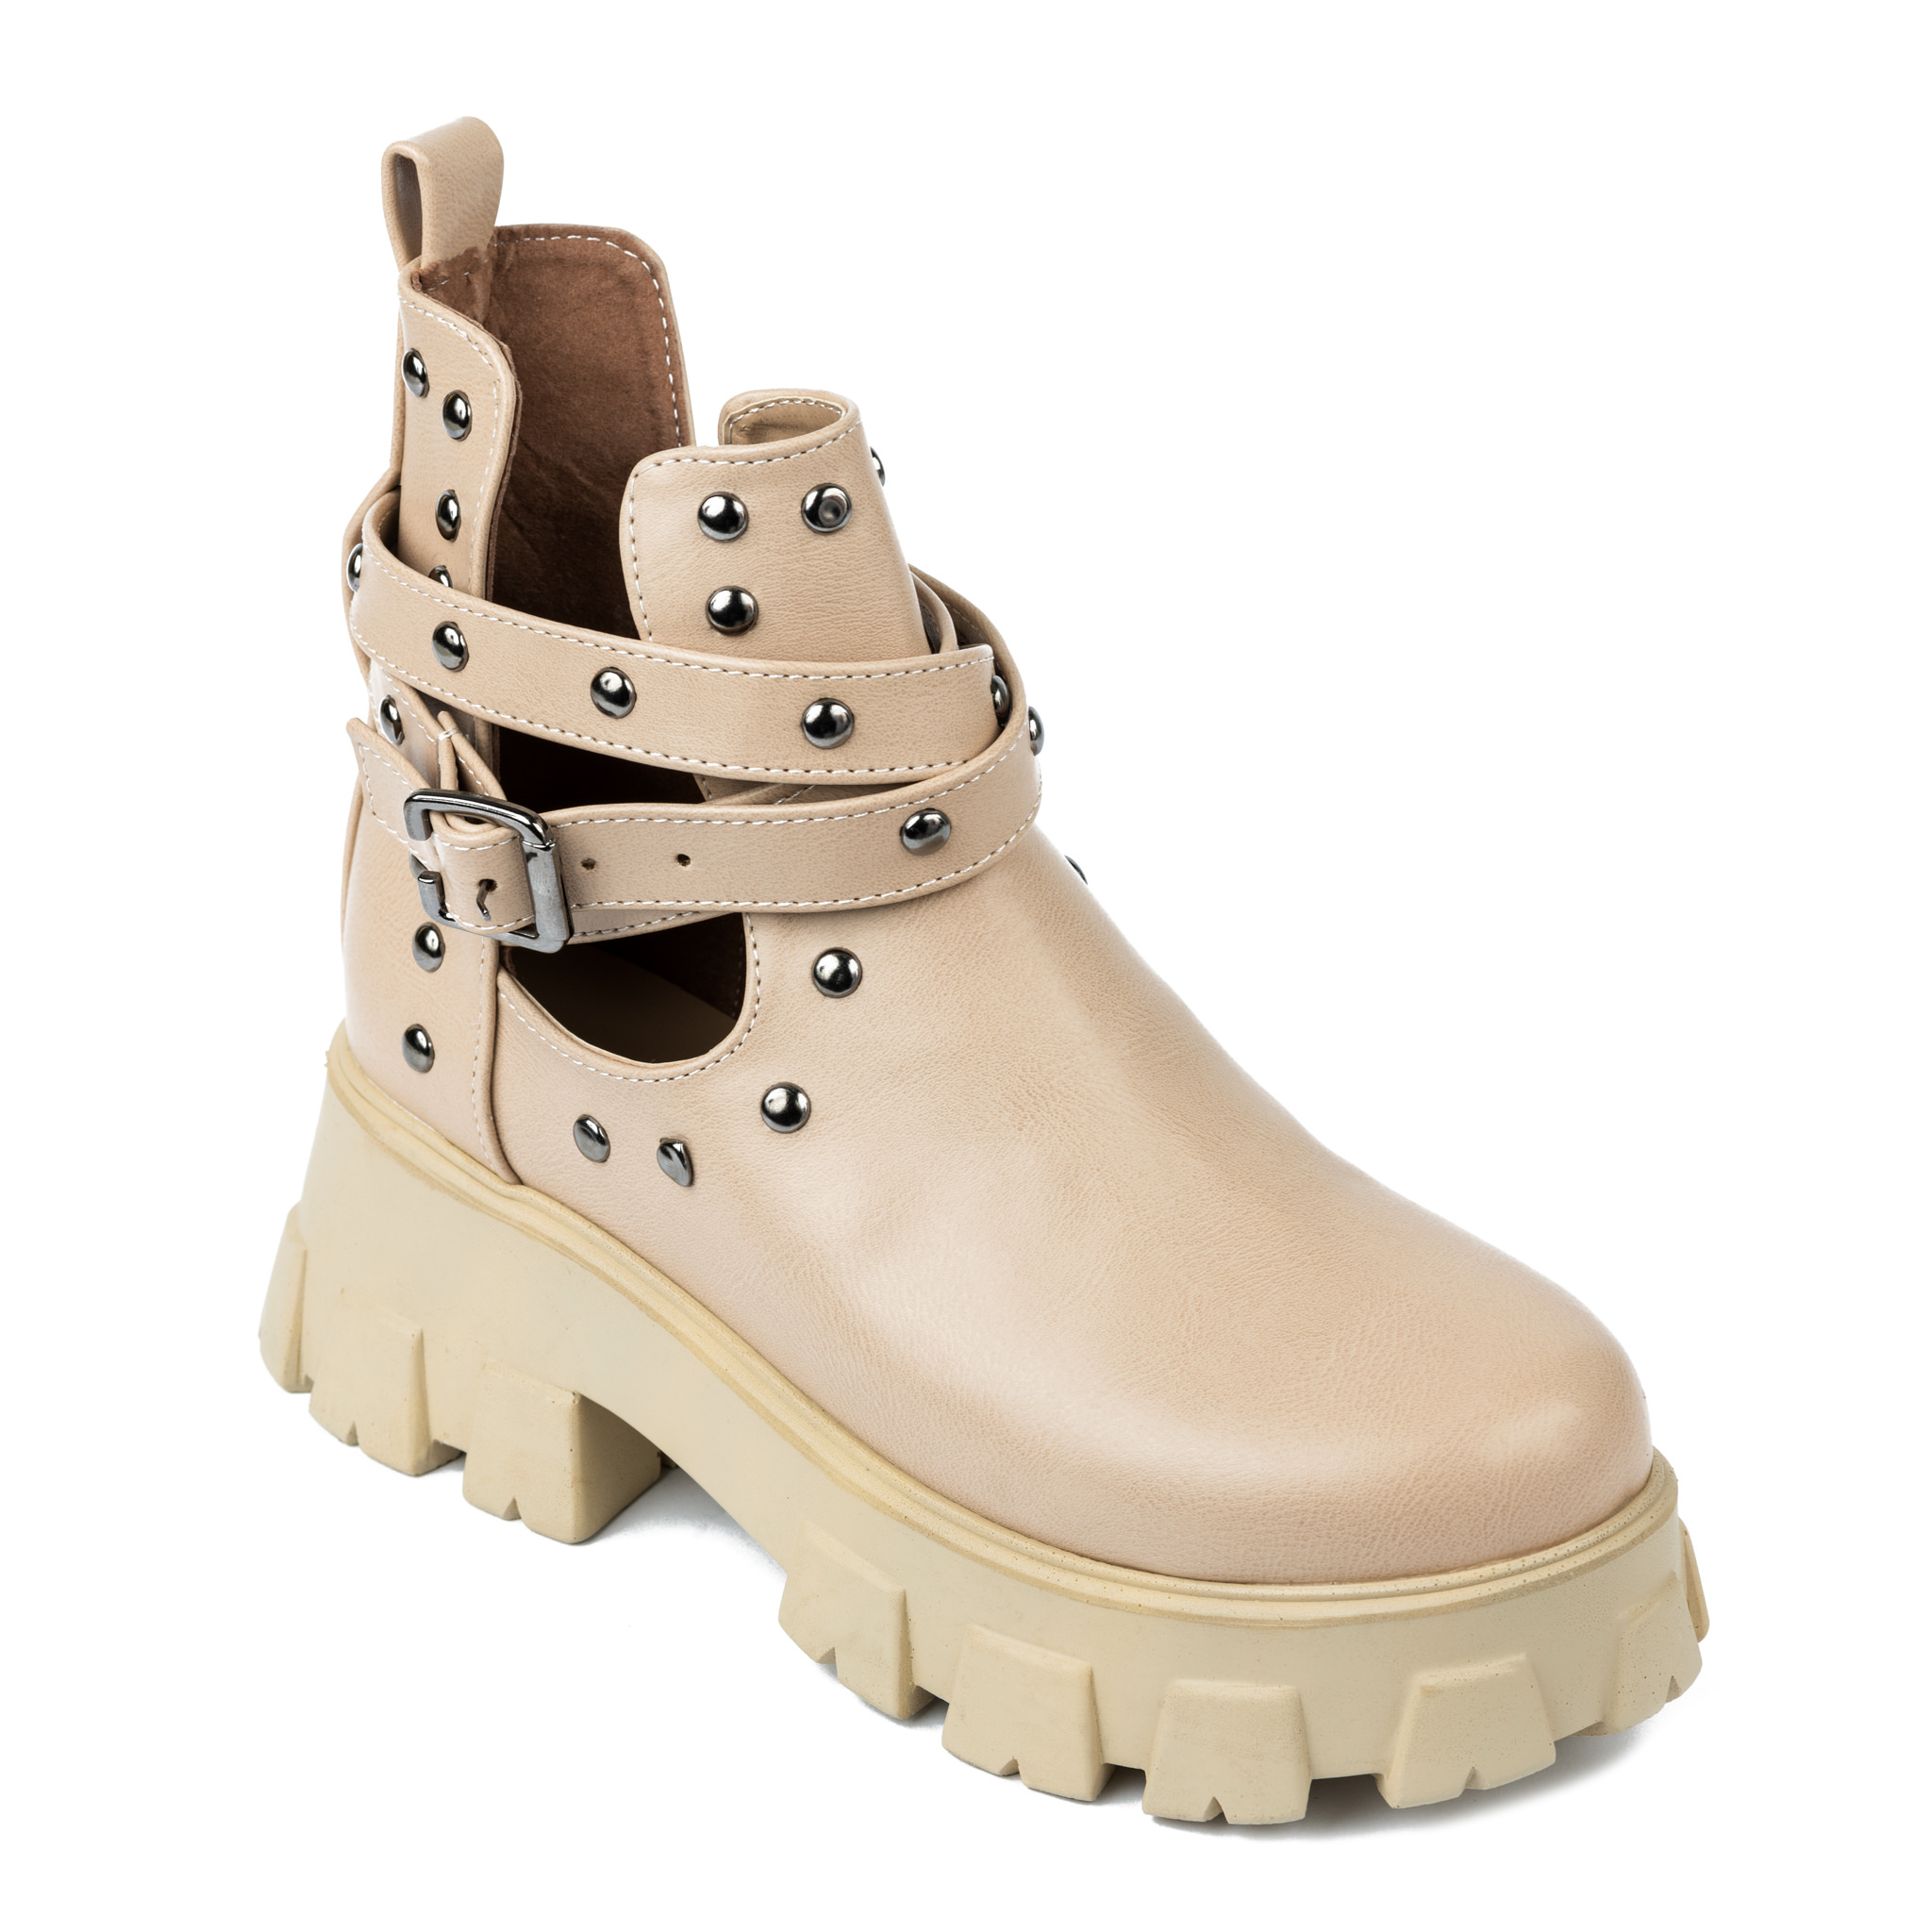 ANKLE BOOTS WITH BELTS AND RIVETS - BEIGE